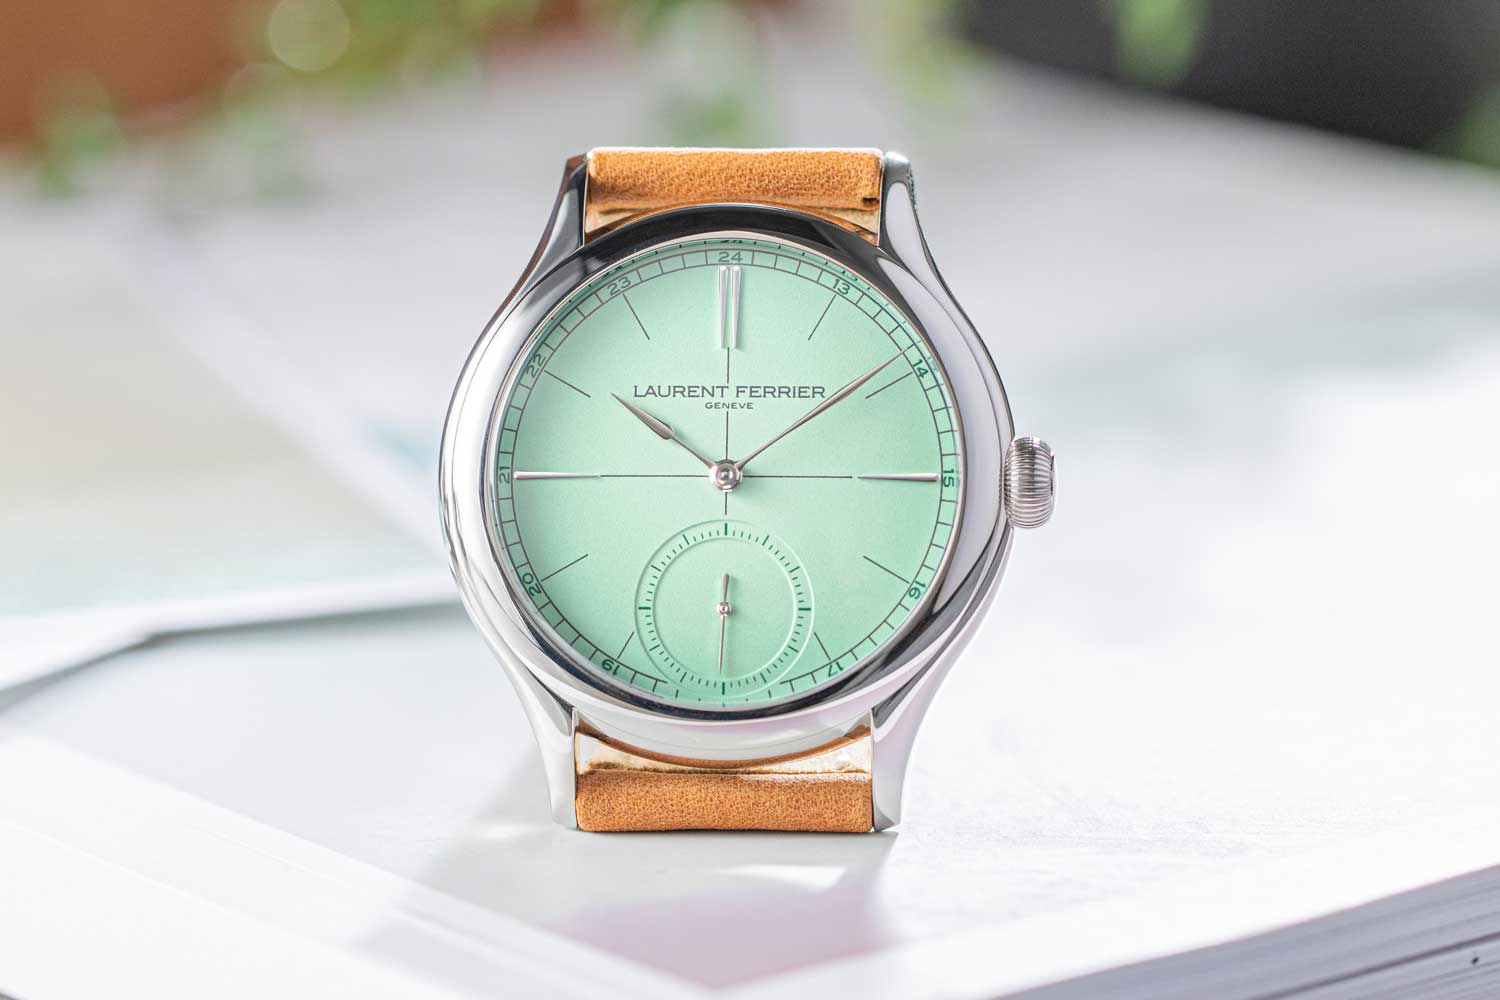 The high polished contours of the case with a pastel green gradient dial create a visually soft appearance overall (Image: Revolution©)